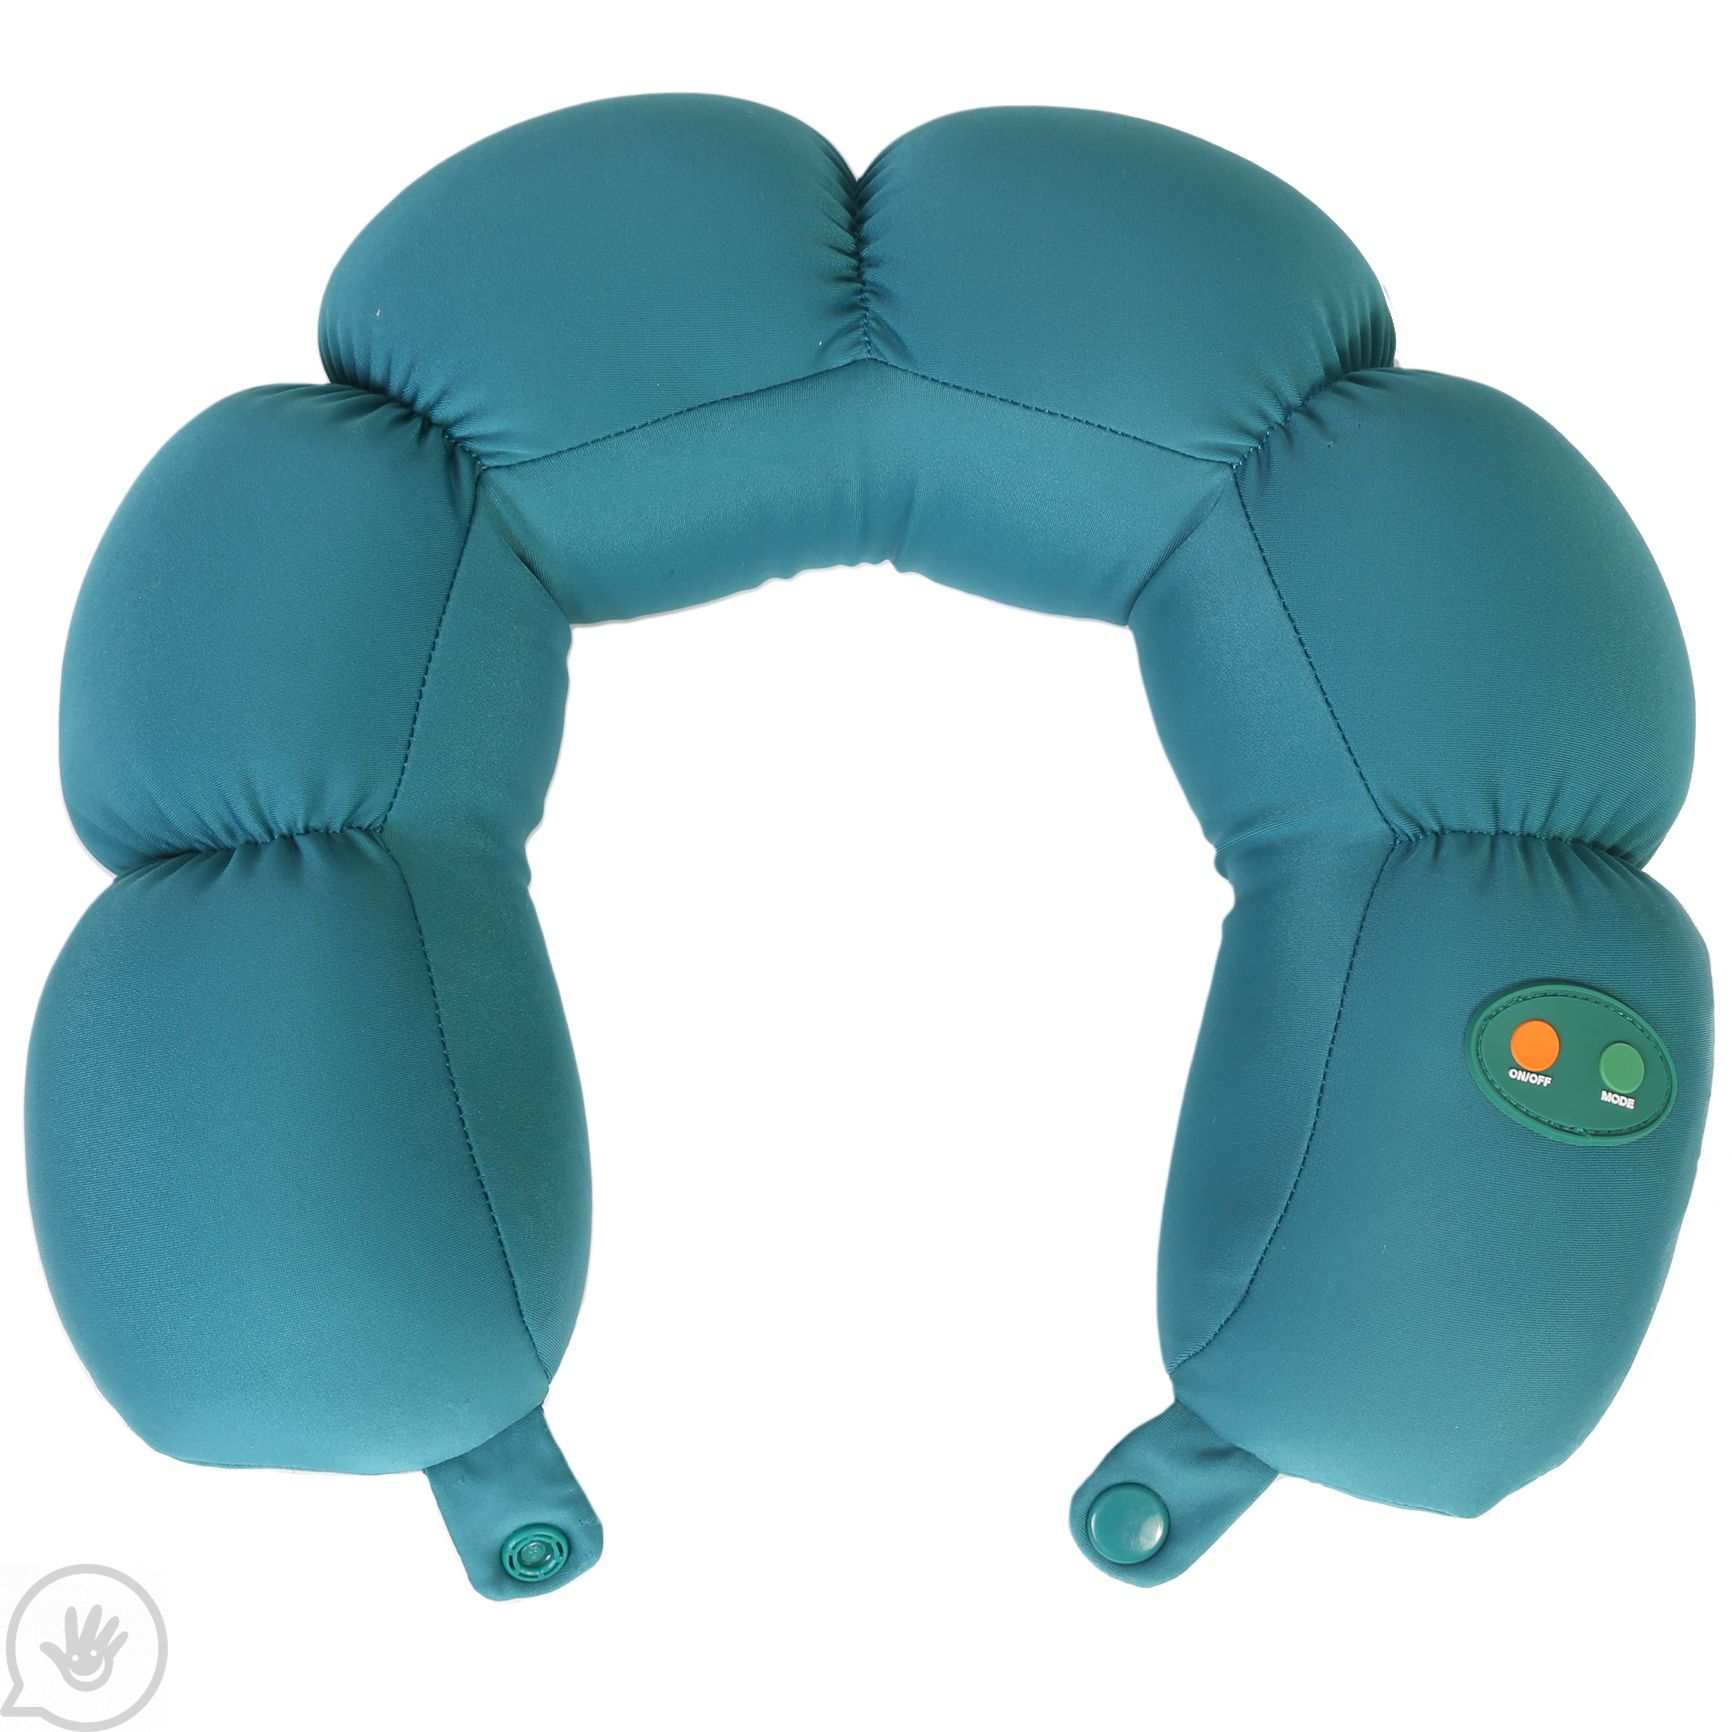 Squeeze-operated Sensory Calming with knobs on one side Vibrating Pillow 